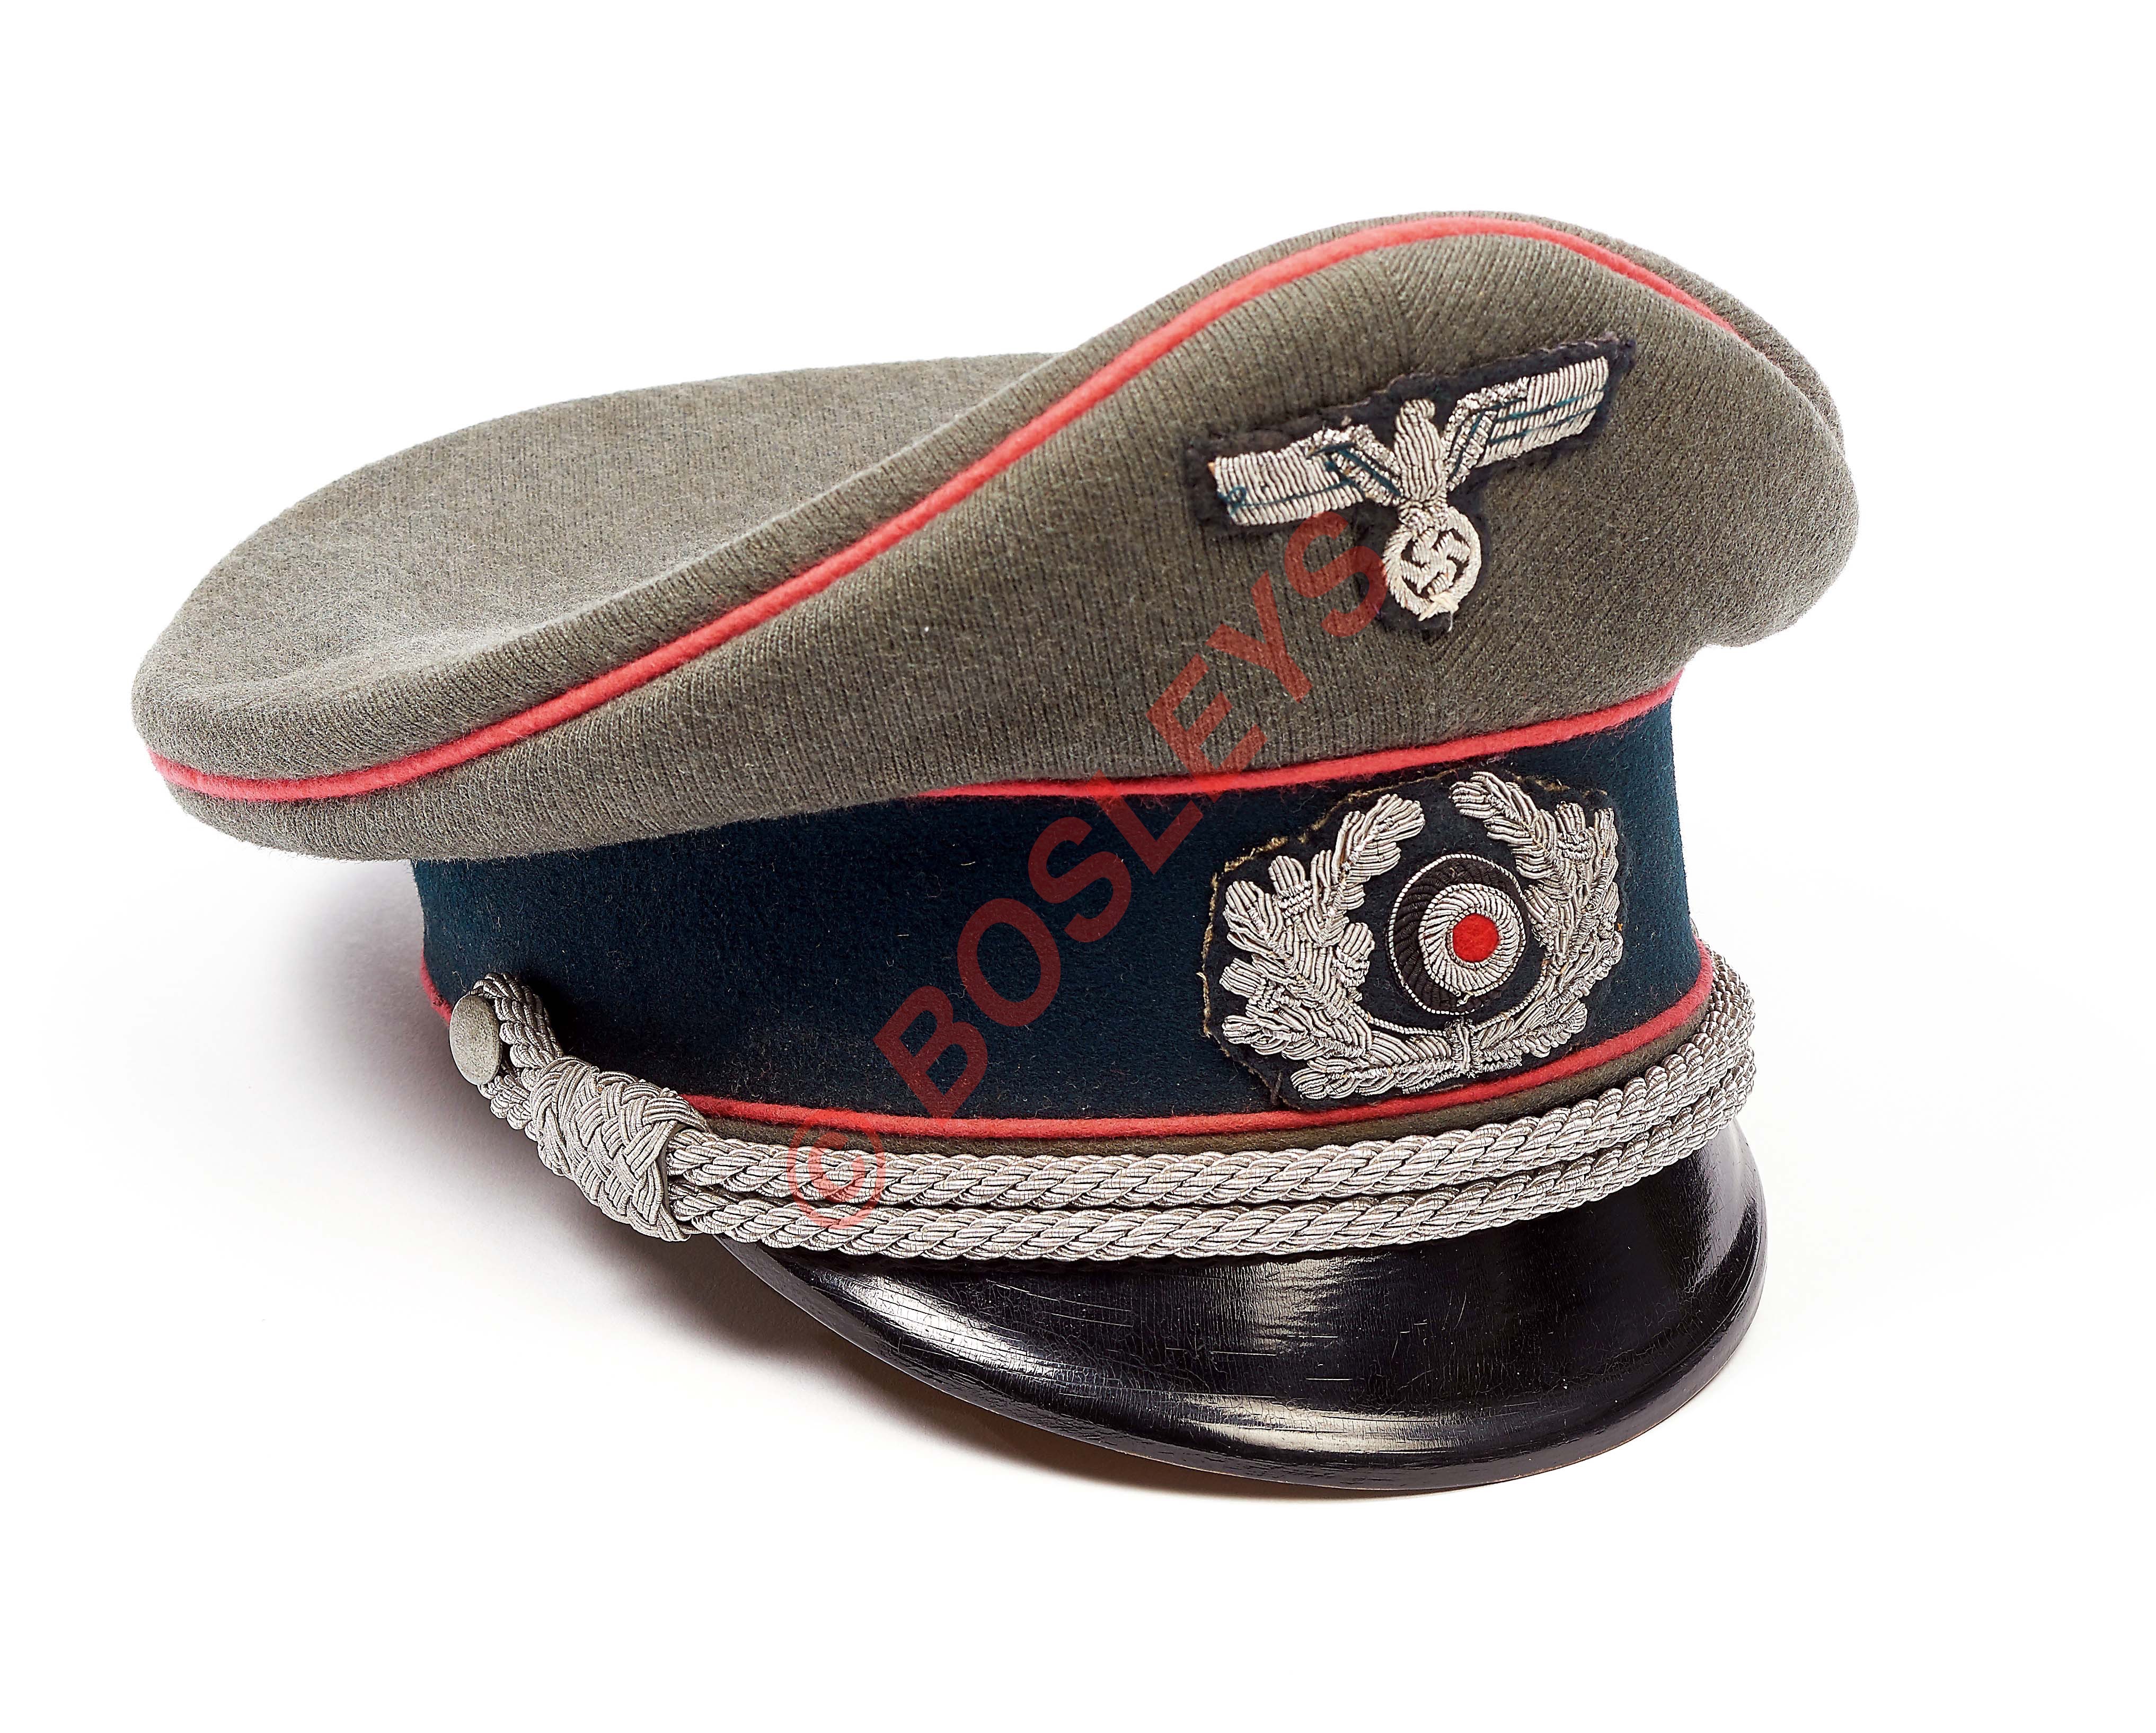 German Third Reich Army Panzer Officer's peaked cap by Erel.A fine example of field grey woollen